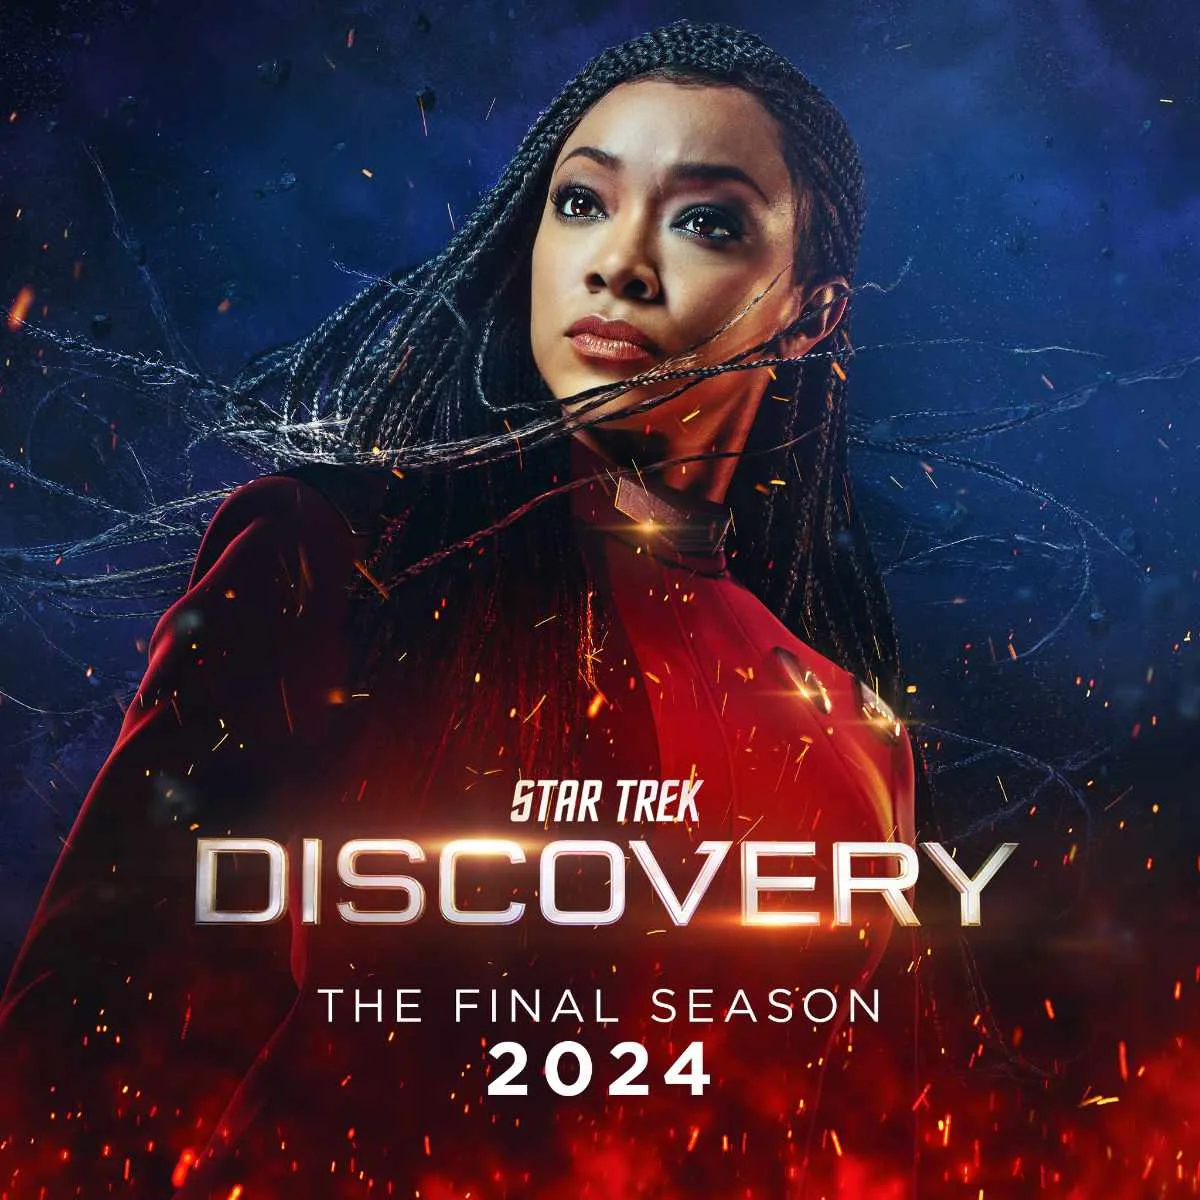 Star Trek: Discovery to End After Season 5